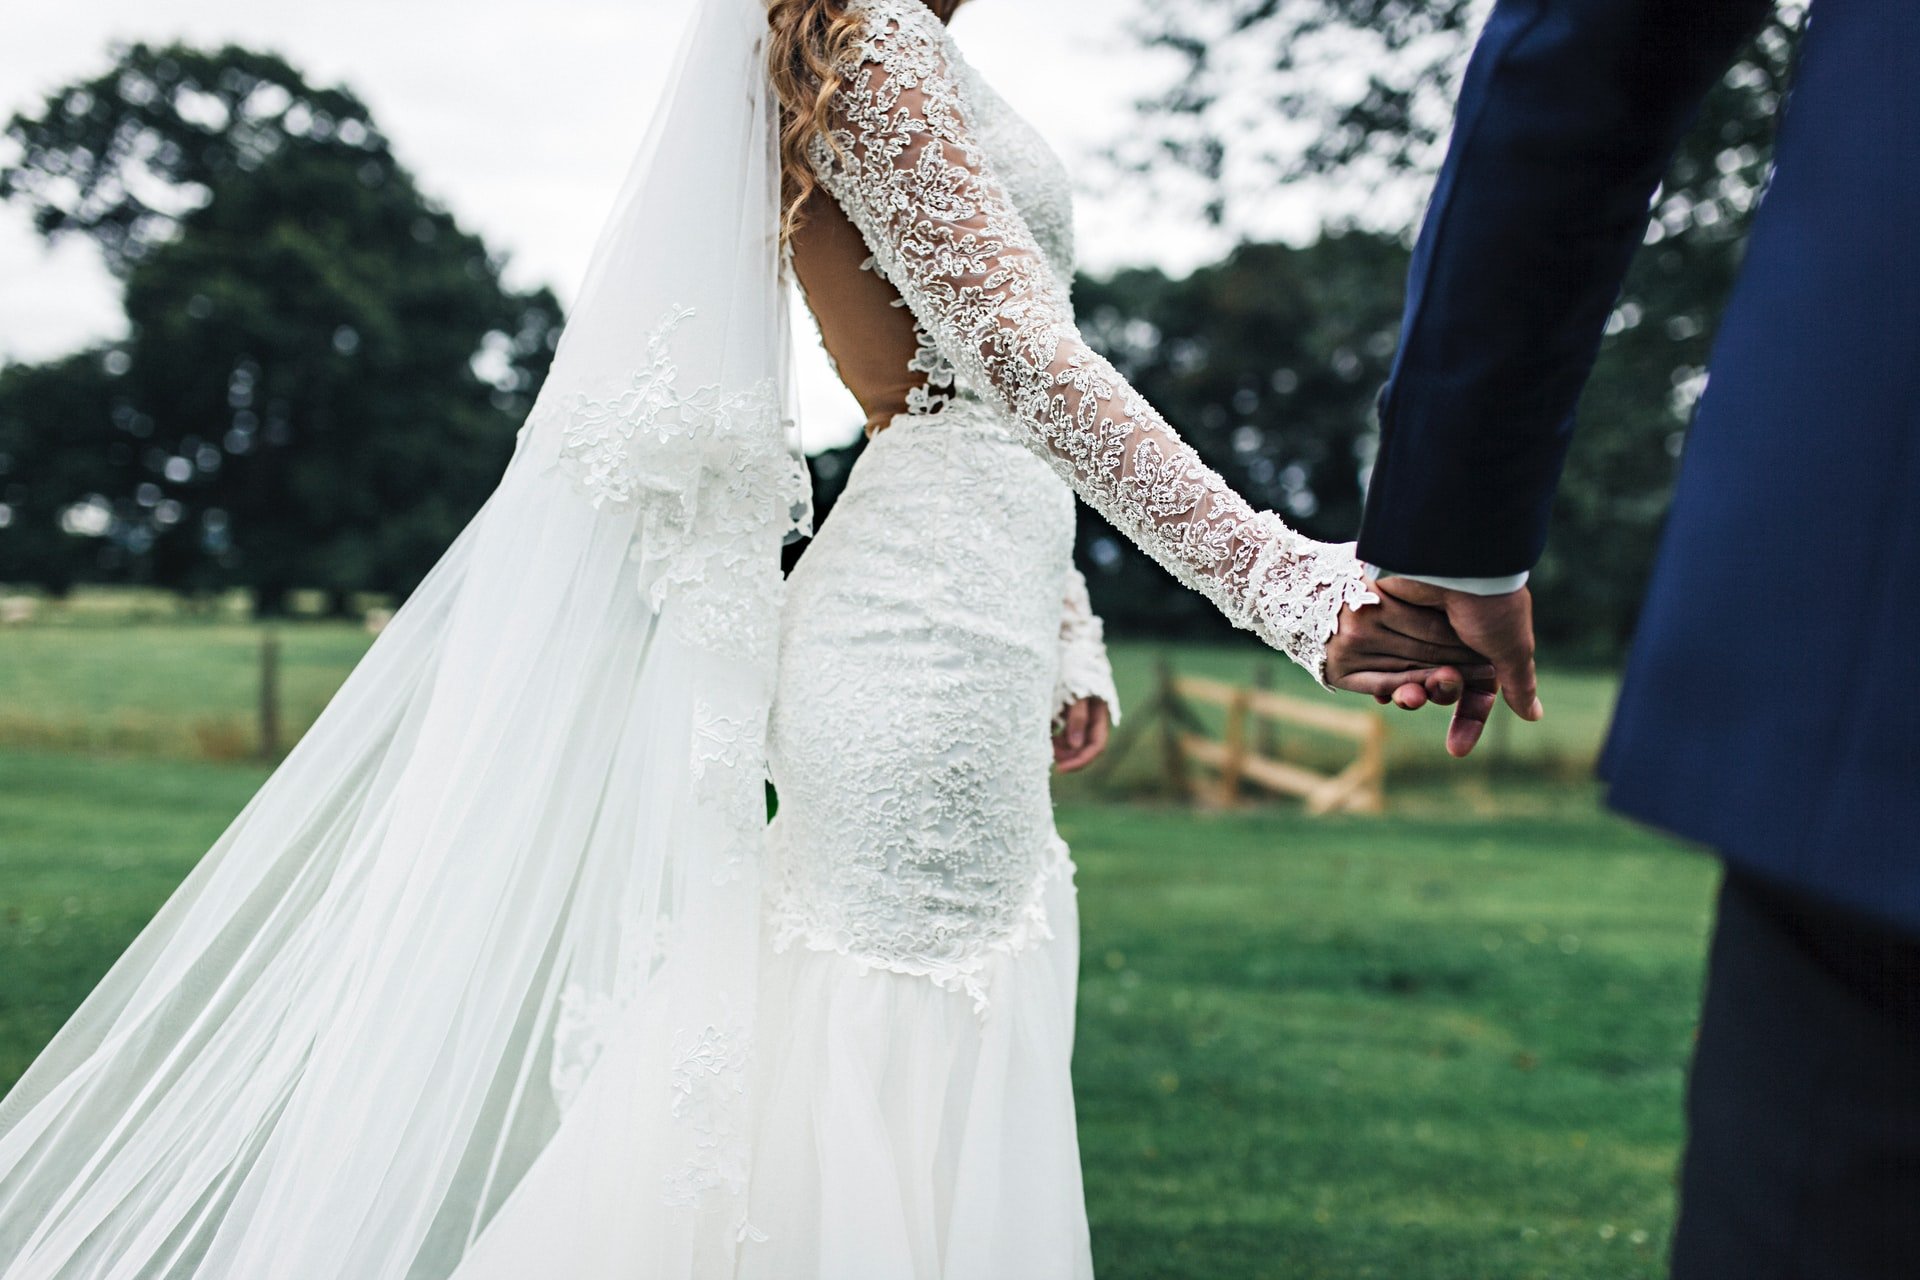 He married the woman. | Source: Unsplash